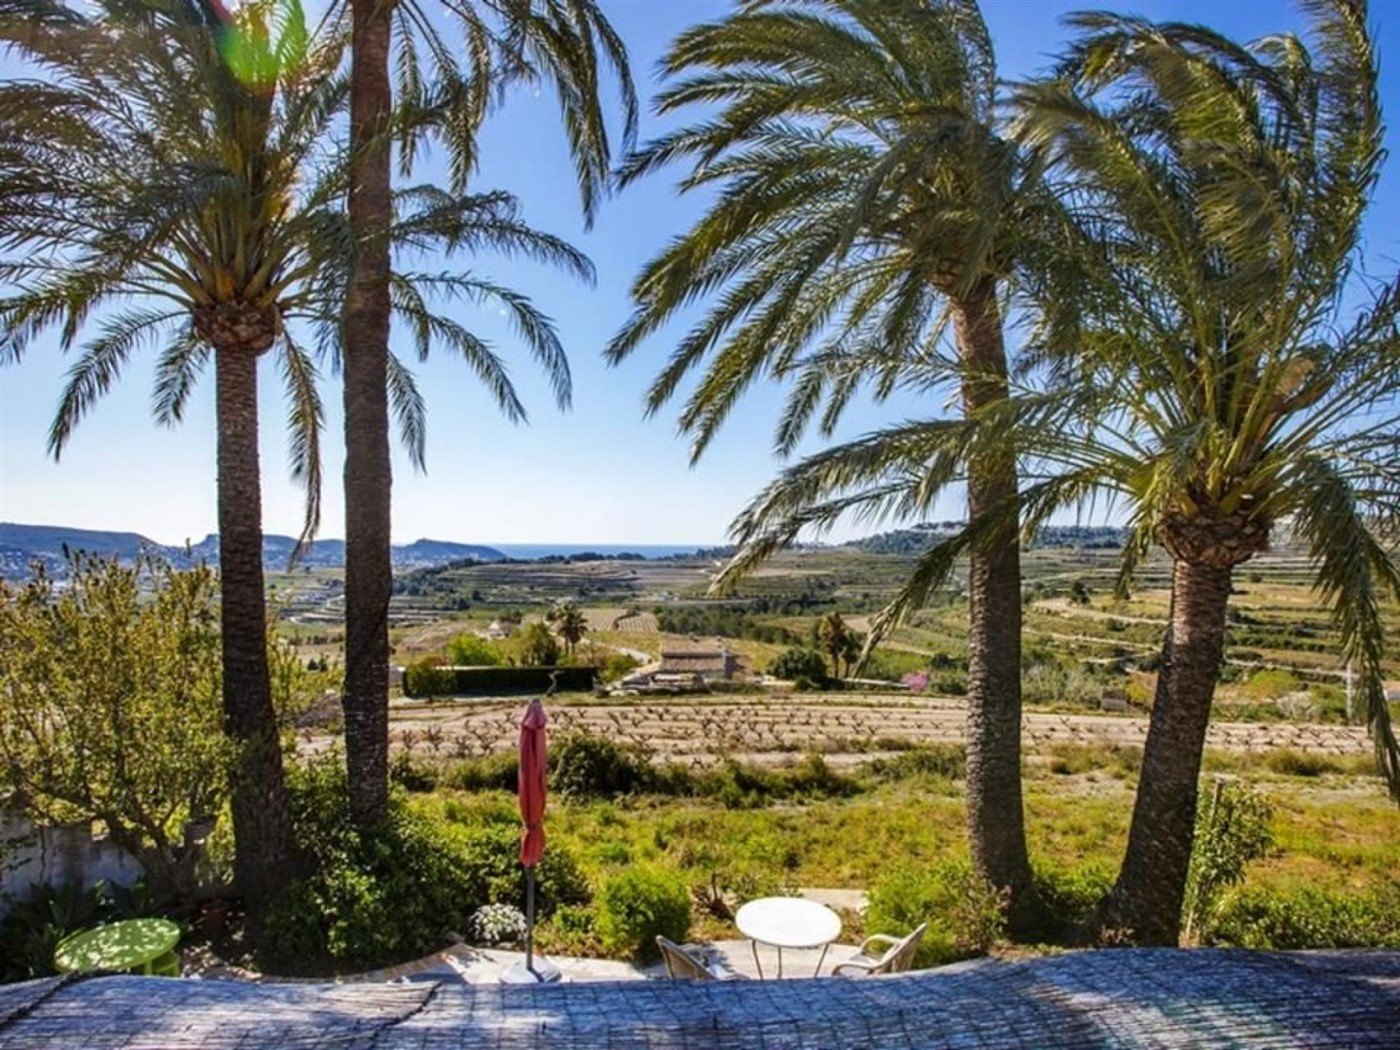 Rustic country property for sale, Teulada, Costa Blanca, sea view